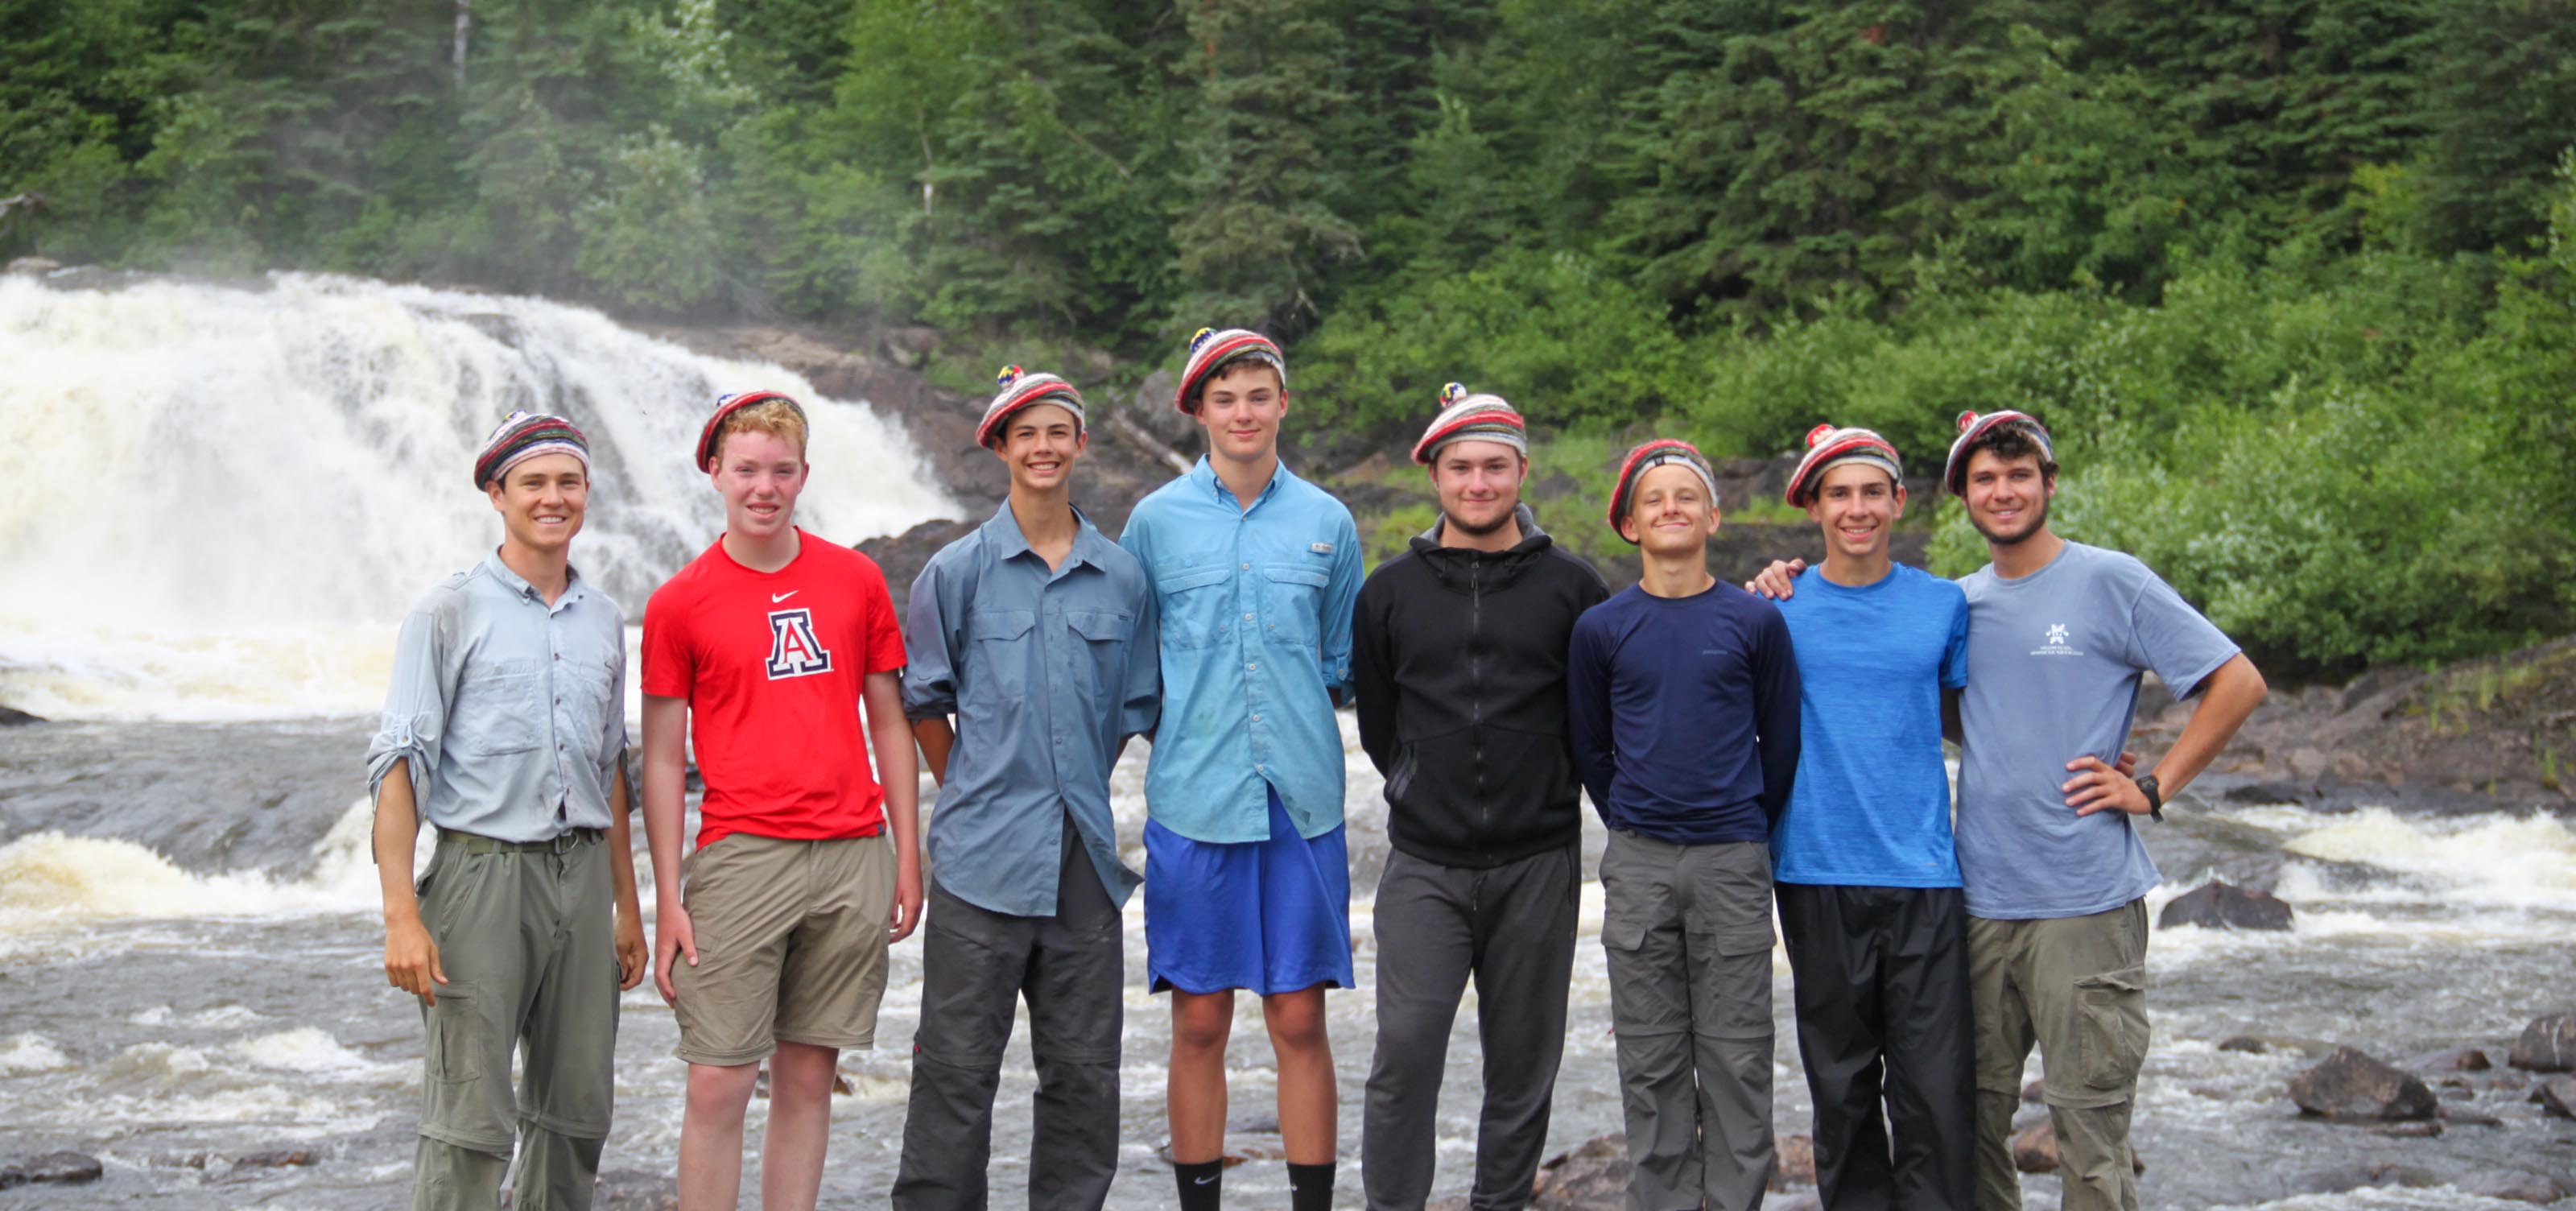 group of boys standing in front of a waterfall smiling for the camera.